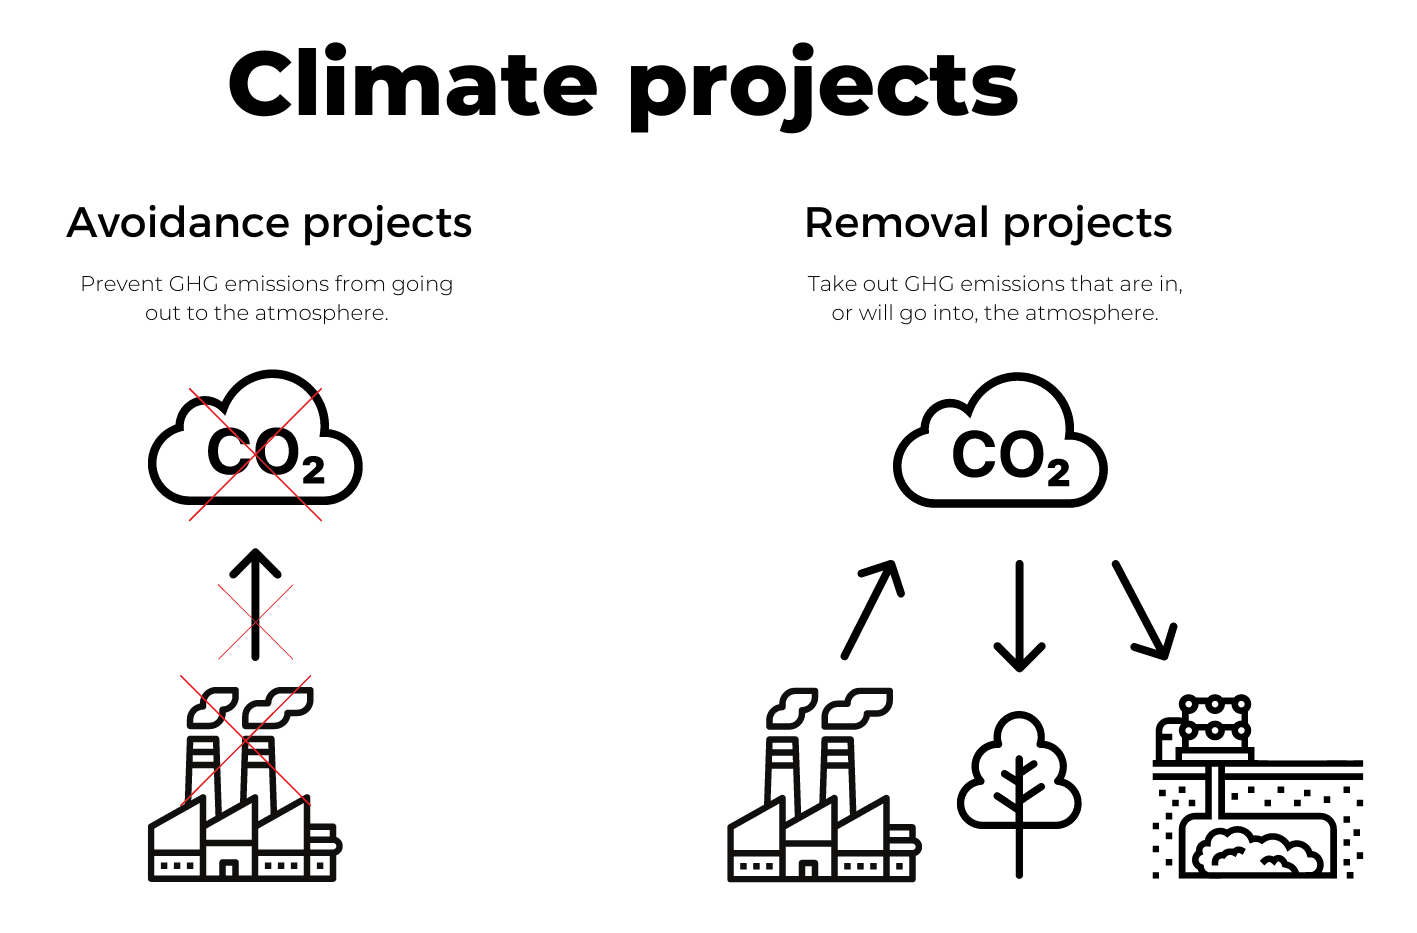 How do climate projects work?